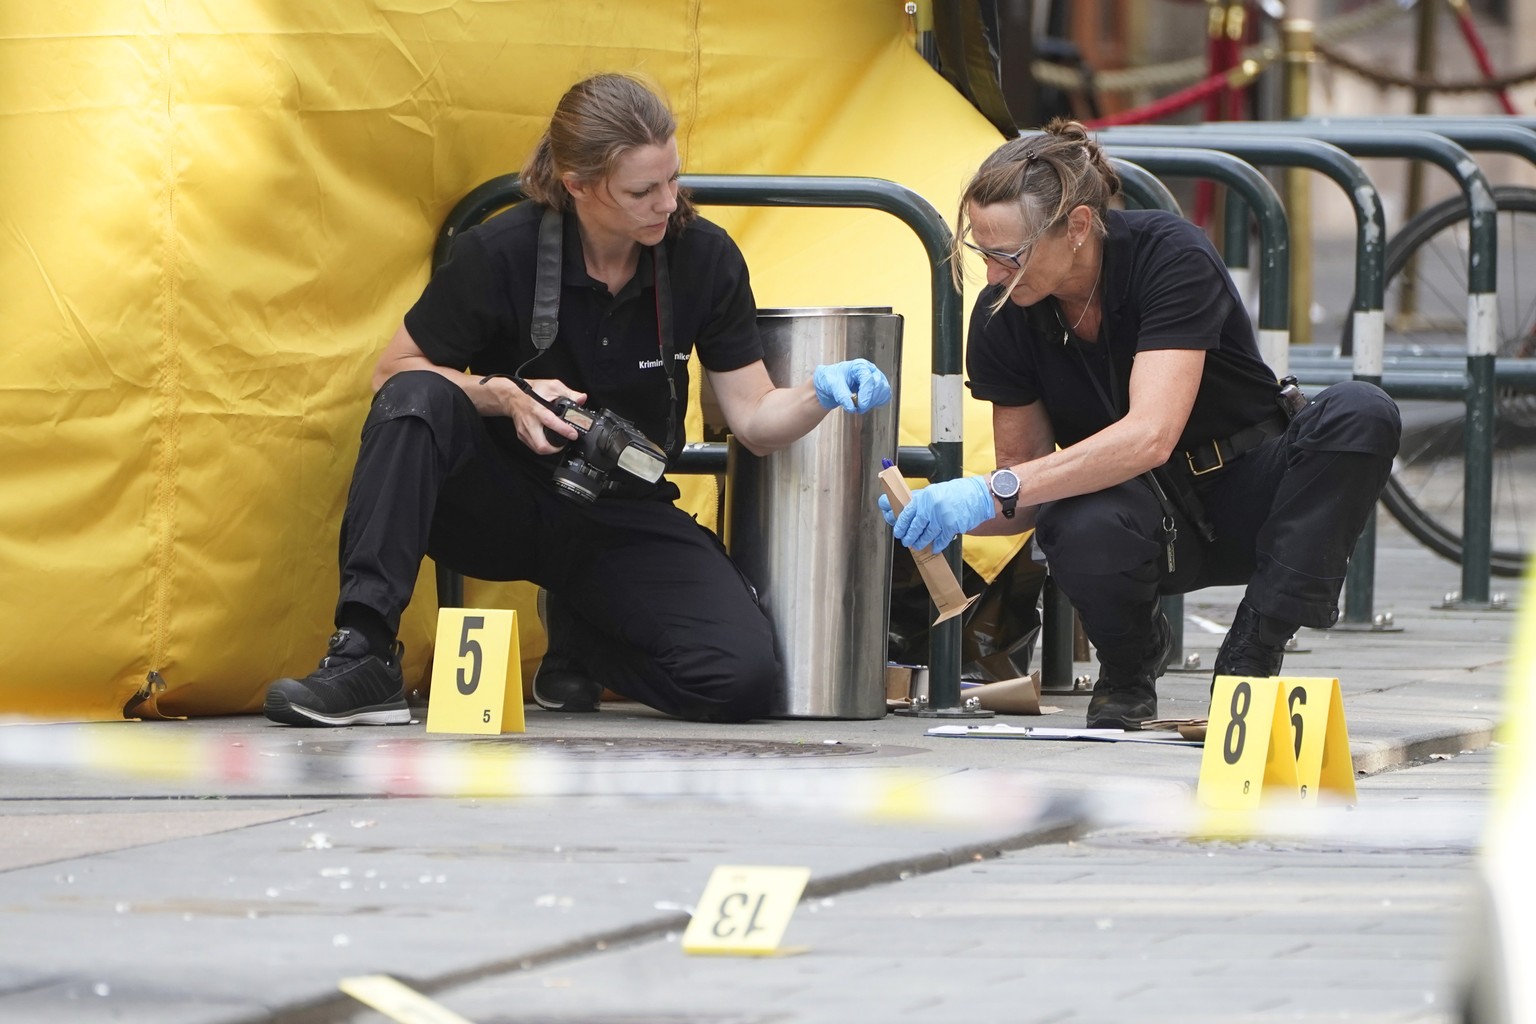 epa10033182 Police collect evidence at a crime scene in the aftermath of overnight shootings in the center of Oslo, Norway, 25 June 2022. Two people were killed and at least 20 were injured when a gun ...